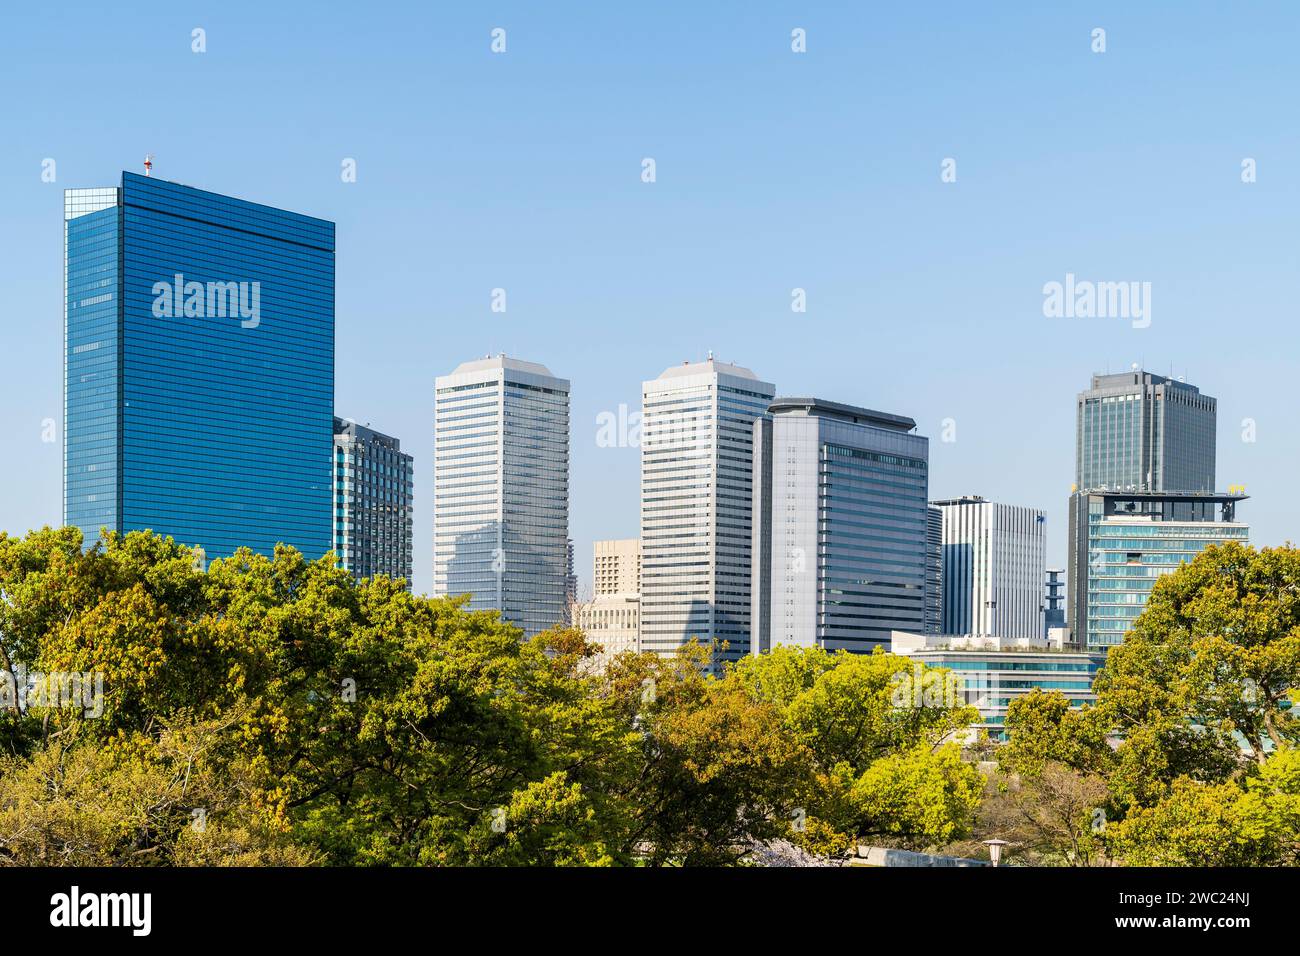 View from Osaka castle park of Osaka Business park with the Crystal Tower, Panasonic Twin Towers and others. Springtime, with clear blue sky. Stock Photo